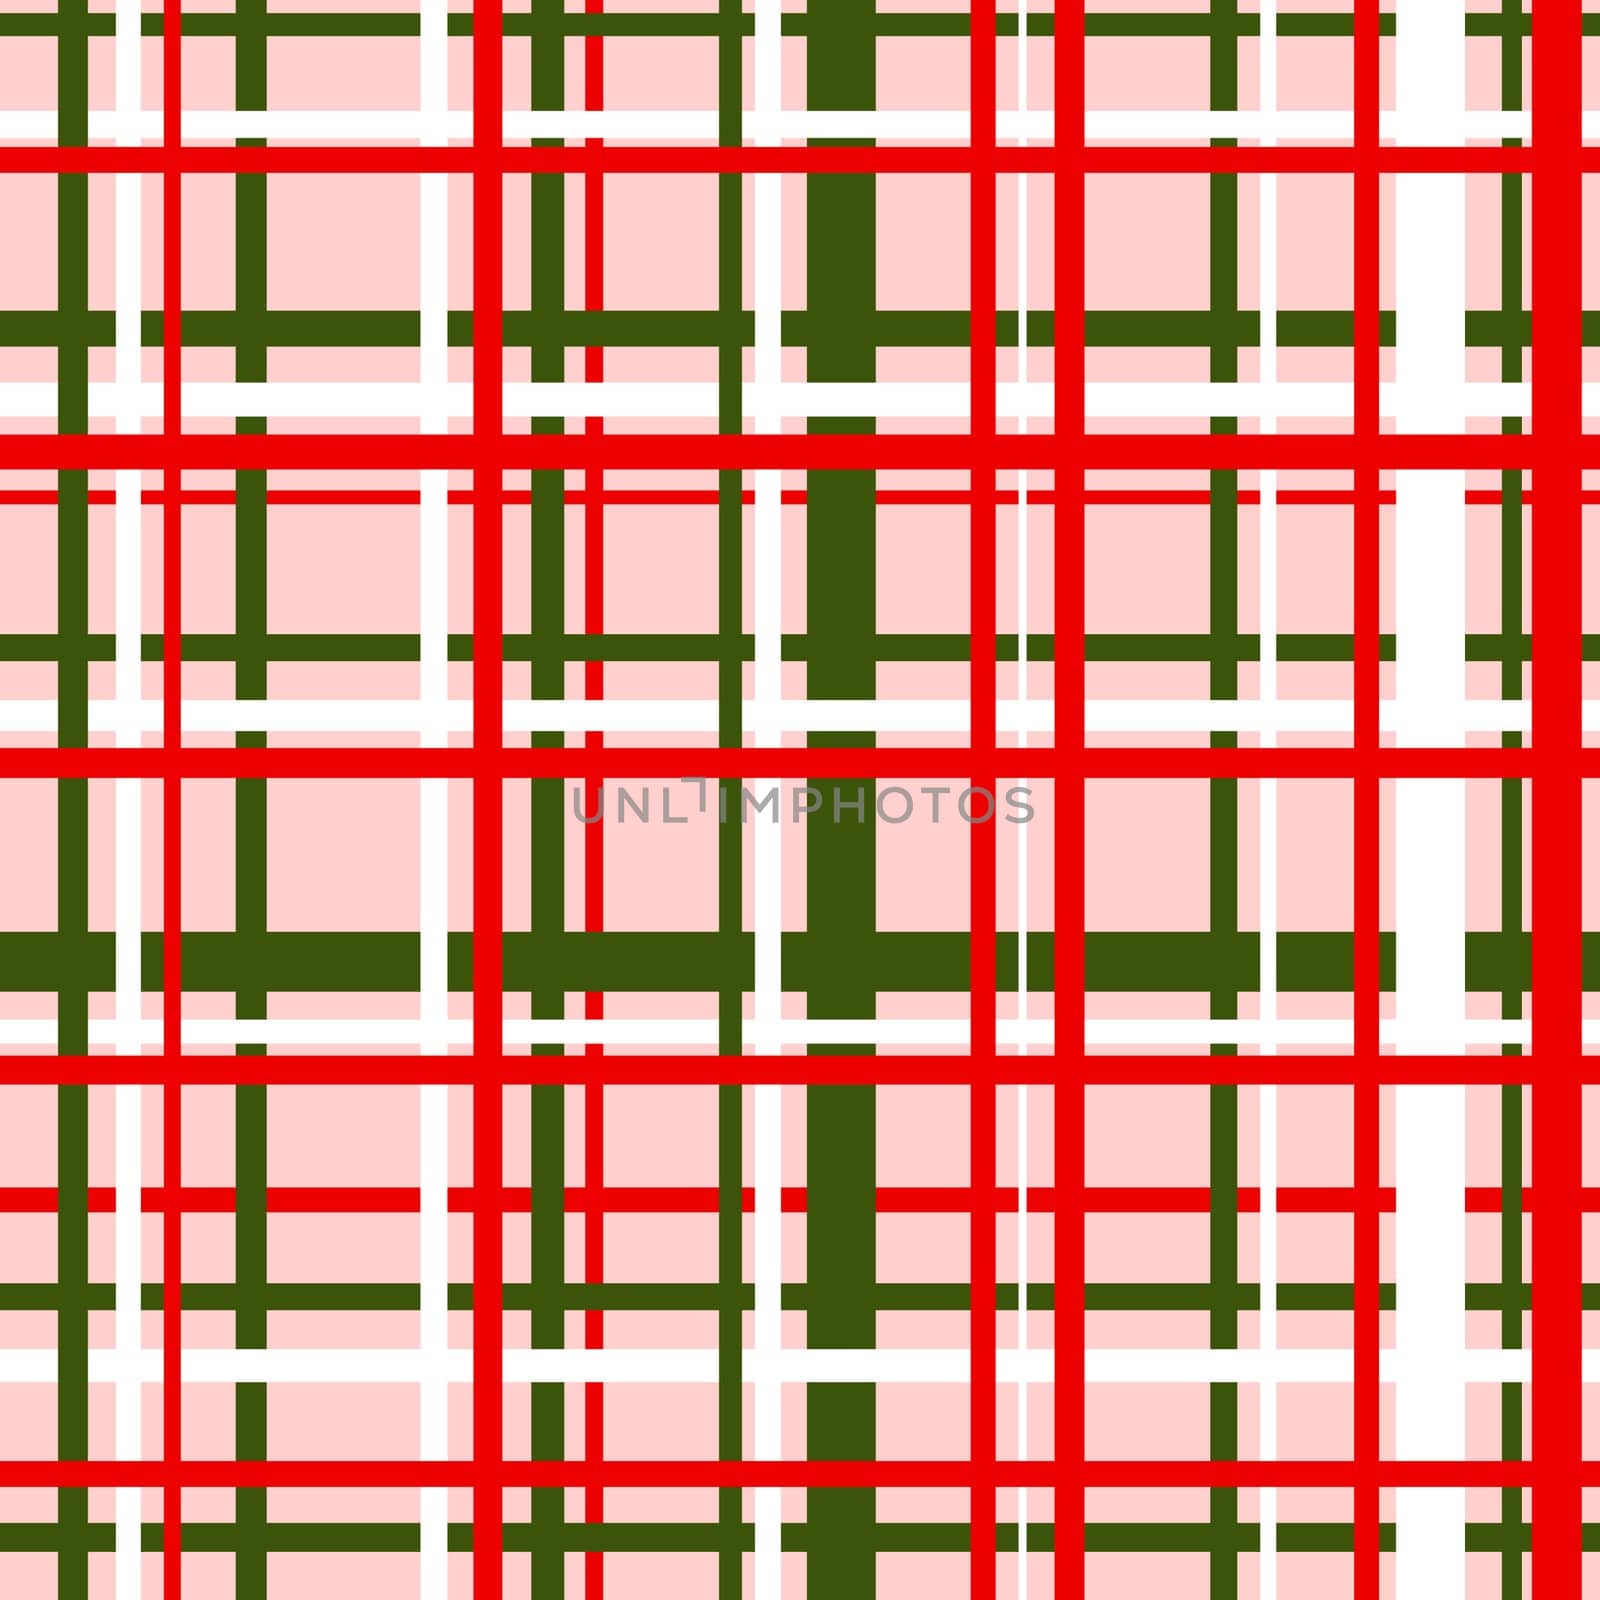 Hand drawn seamless pattern of plaid tartan checkered textile print in red green white Christmas. Checks squares lines in abstract geometric modern colorful design. For wallpaper classic nursery decor. by Lagmar